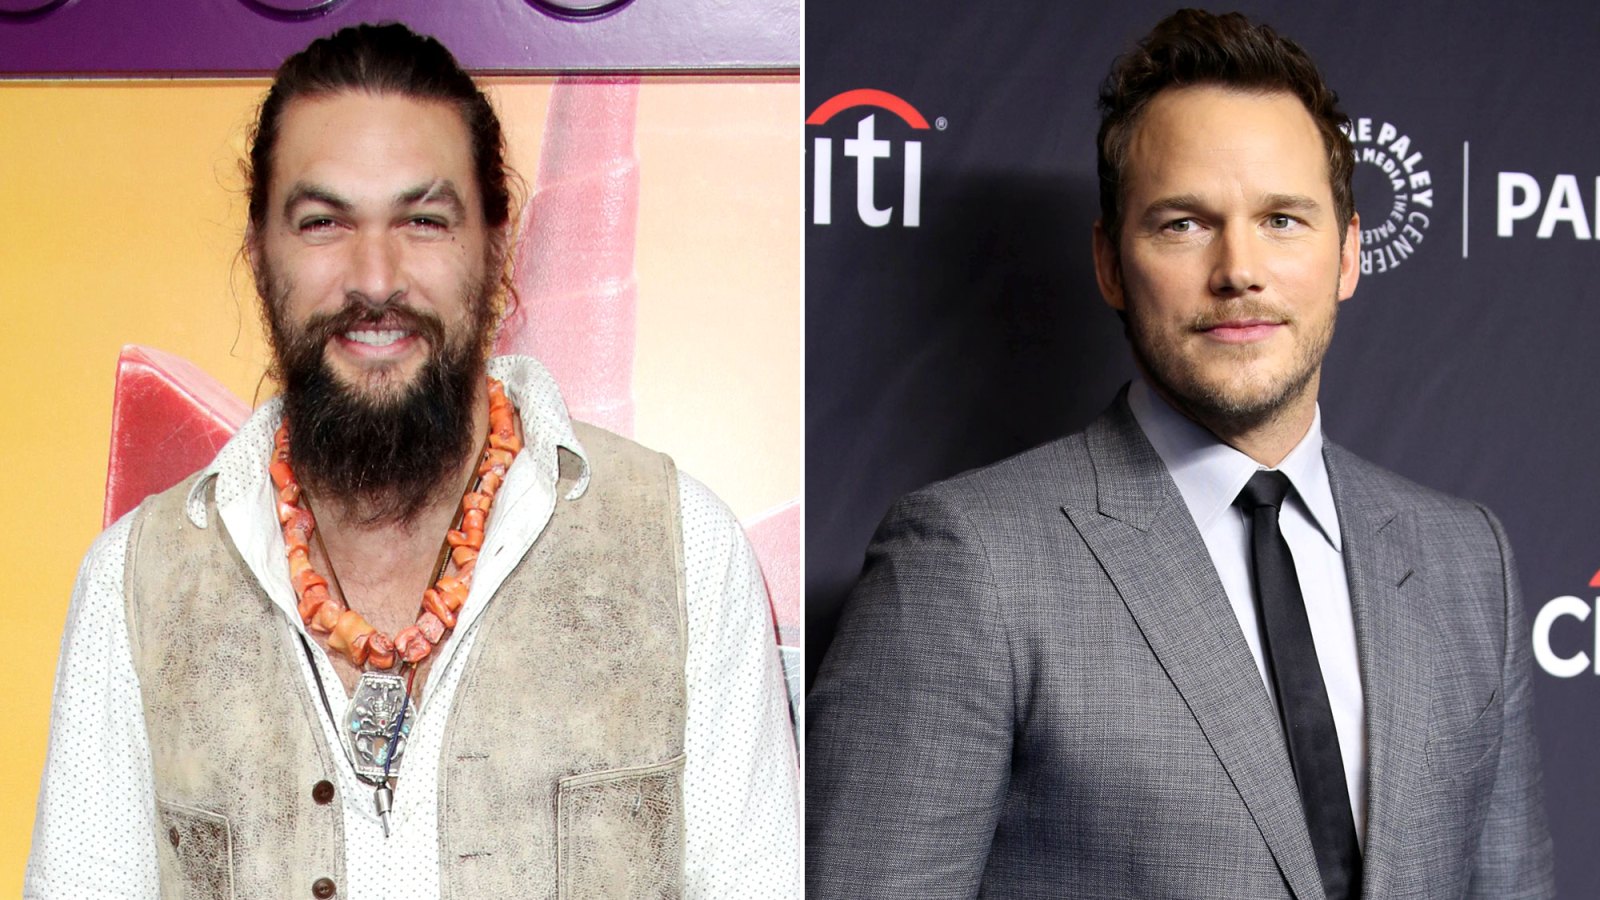 Jason Momoa Apologizes to Chris Pratt After Publicly Shaming Him for Using a Plastic Water Bottle